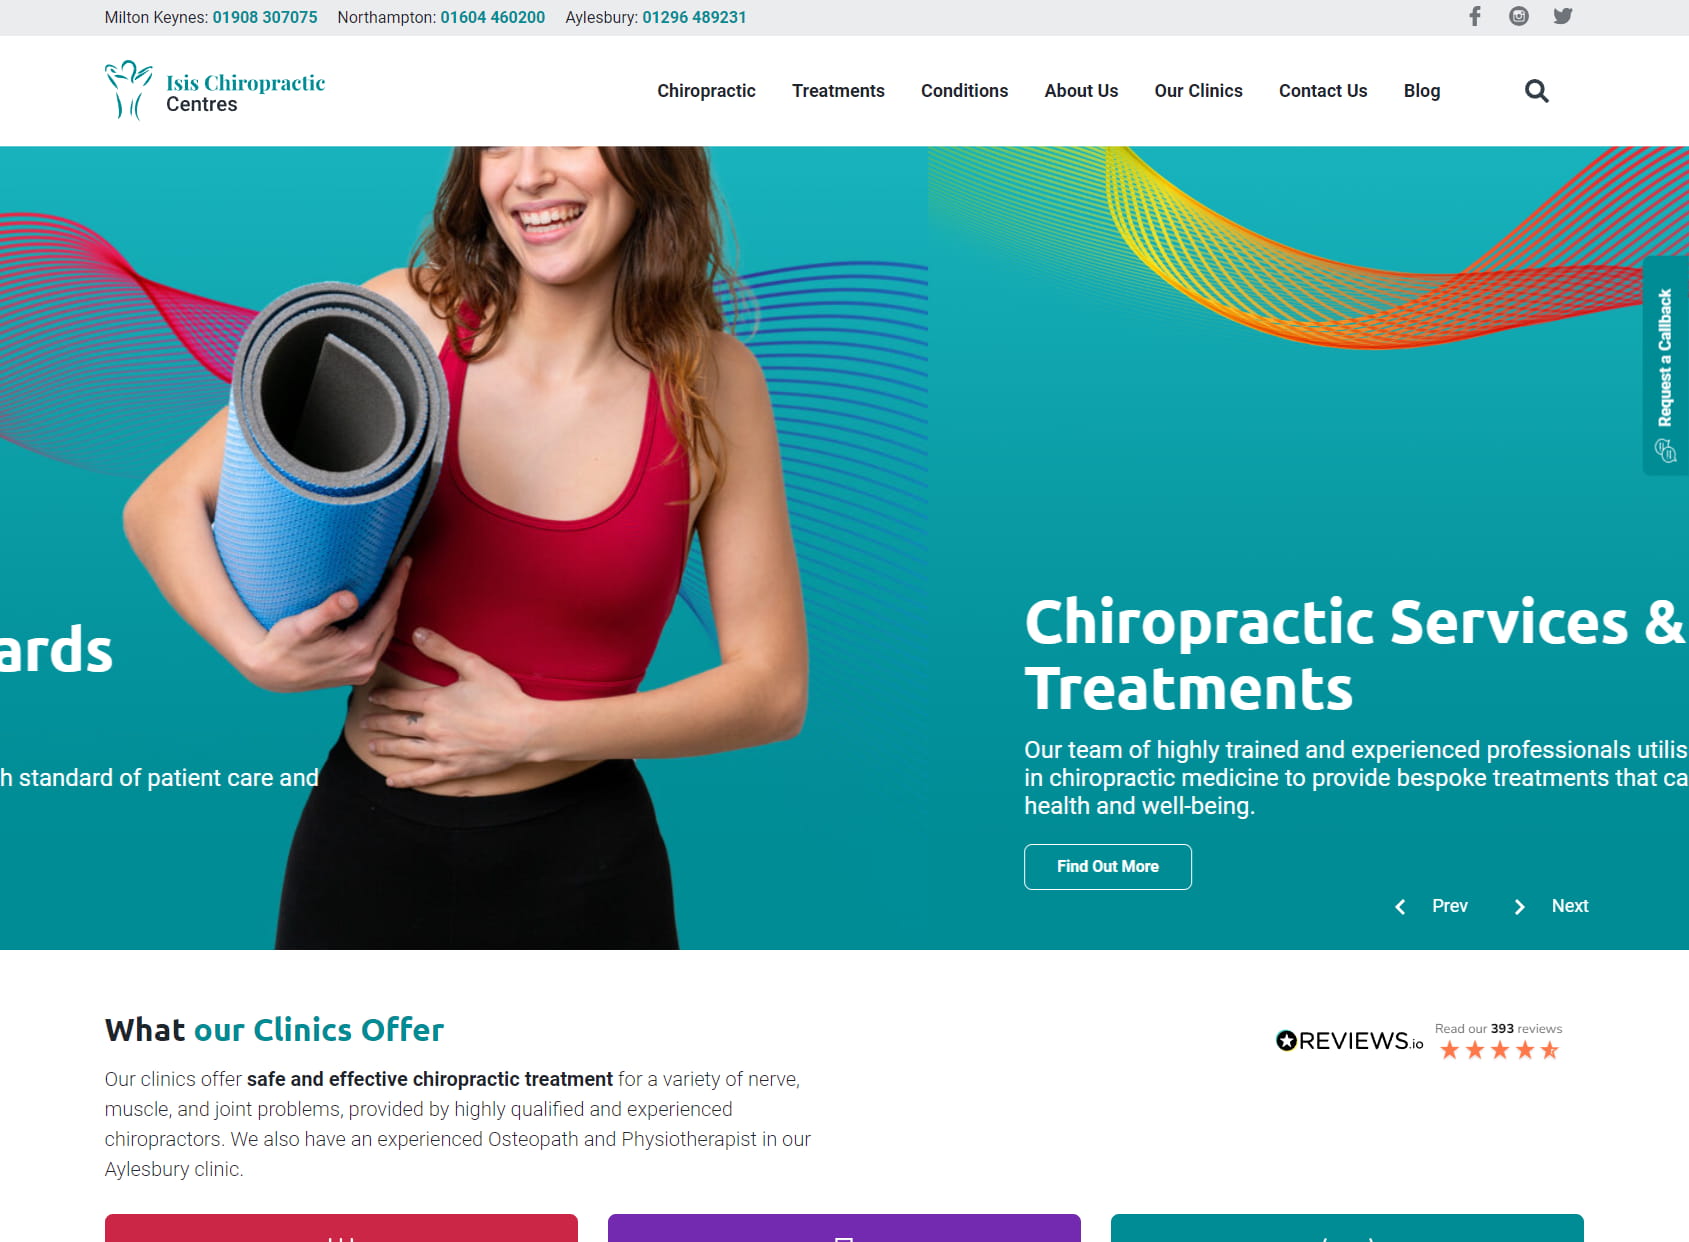 Northampton Chiropractic Centres (ISIS Back Pain and Sports Injury Clinics)